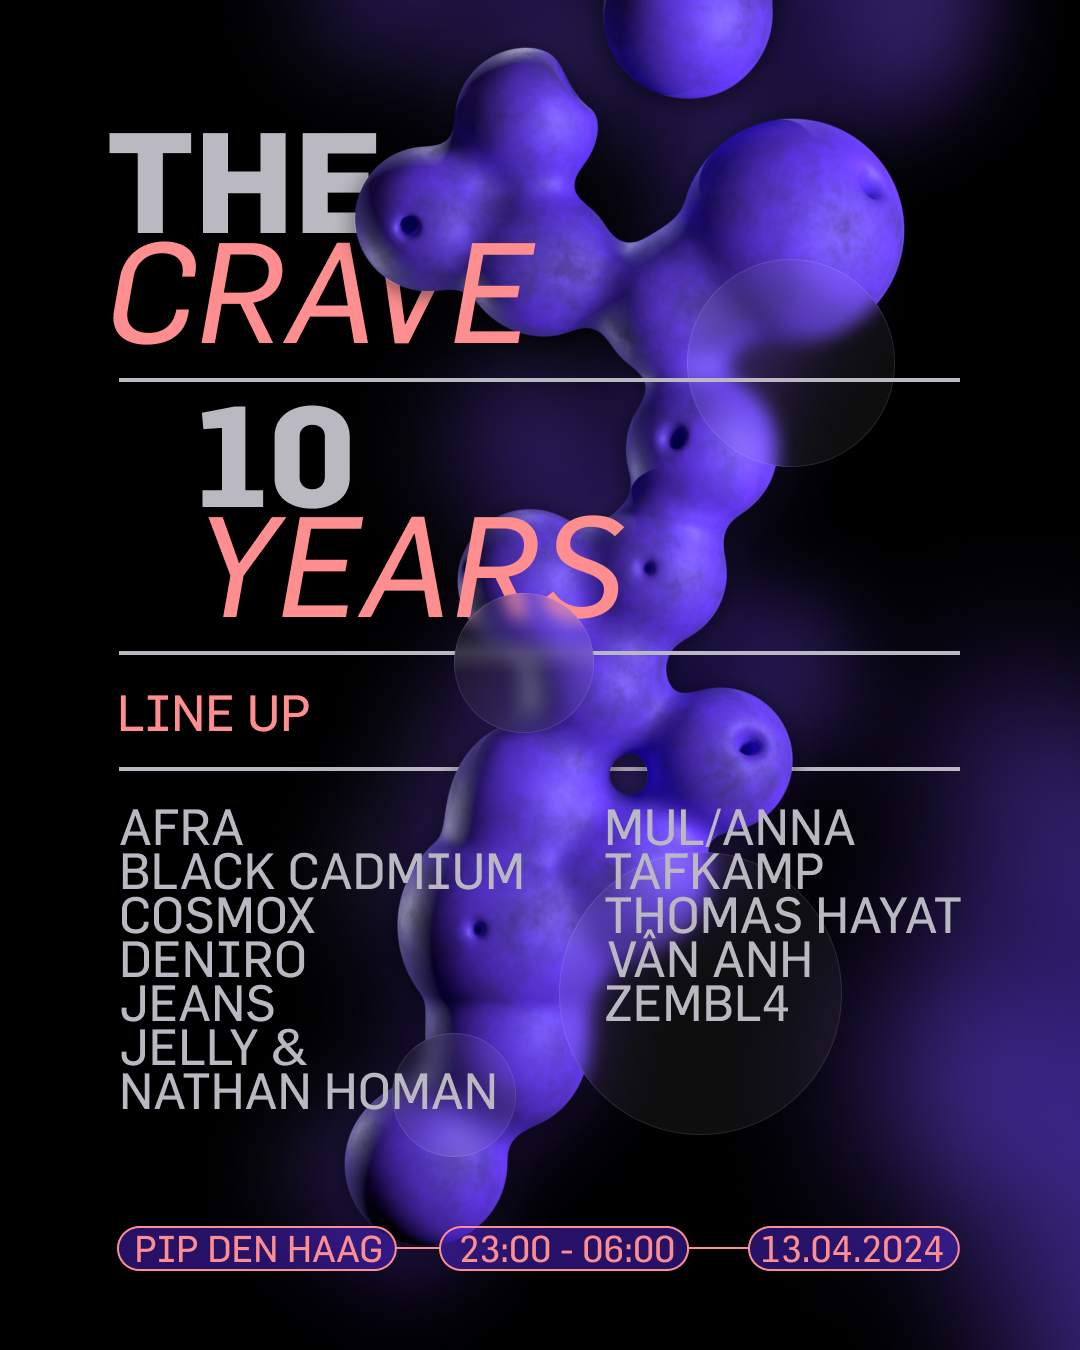 The Crave 10 Years - フライヤー表